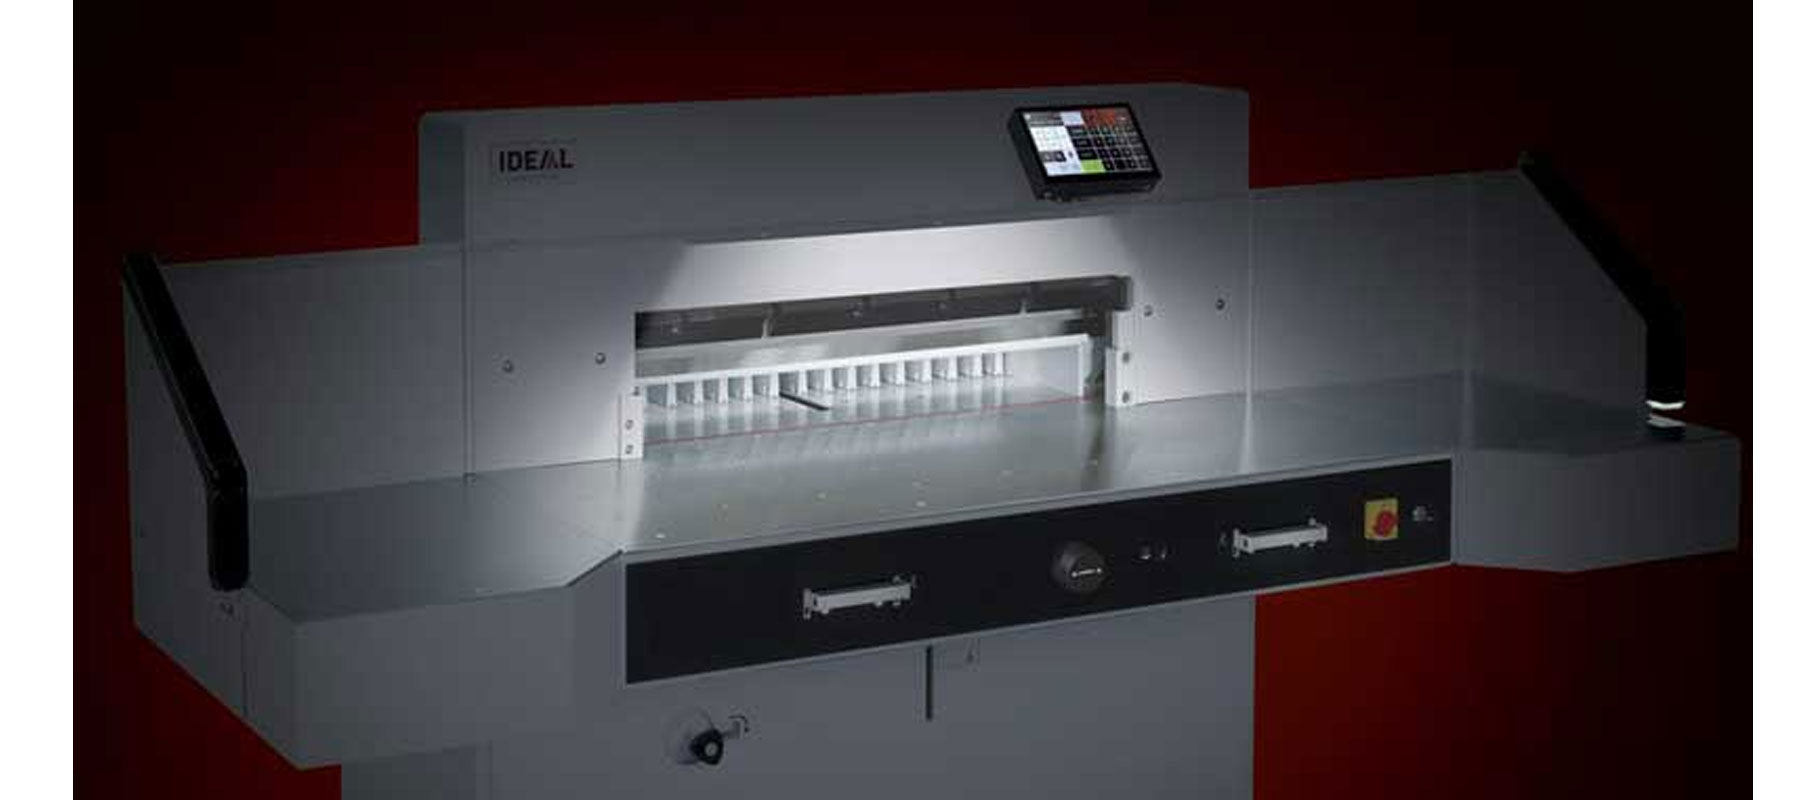 The new generation of Ideal cutting machines